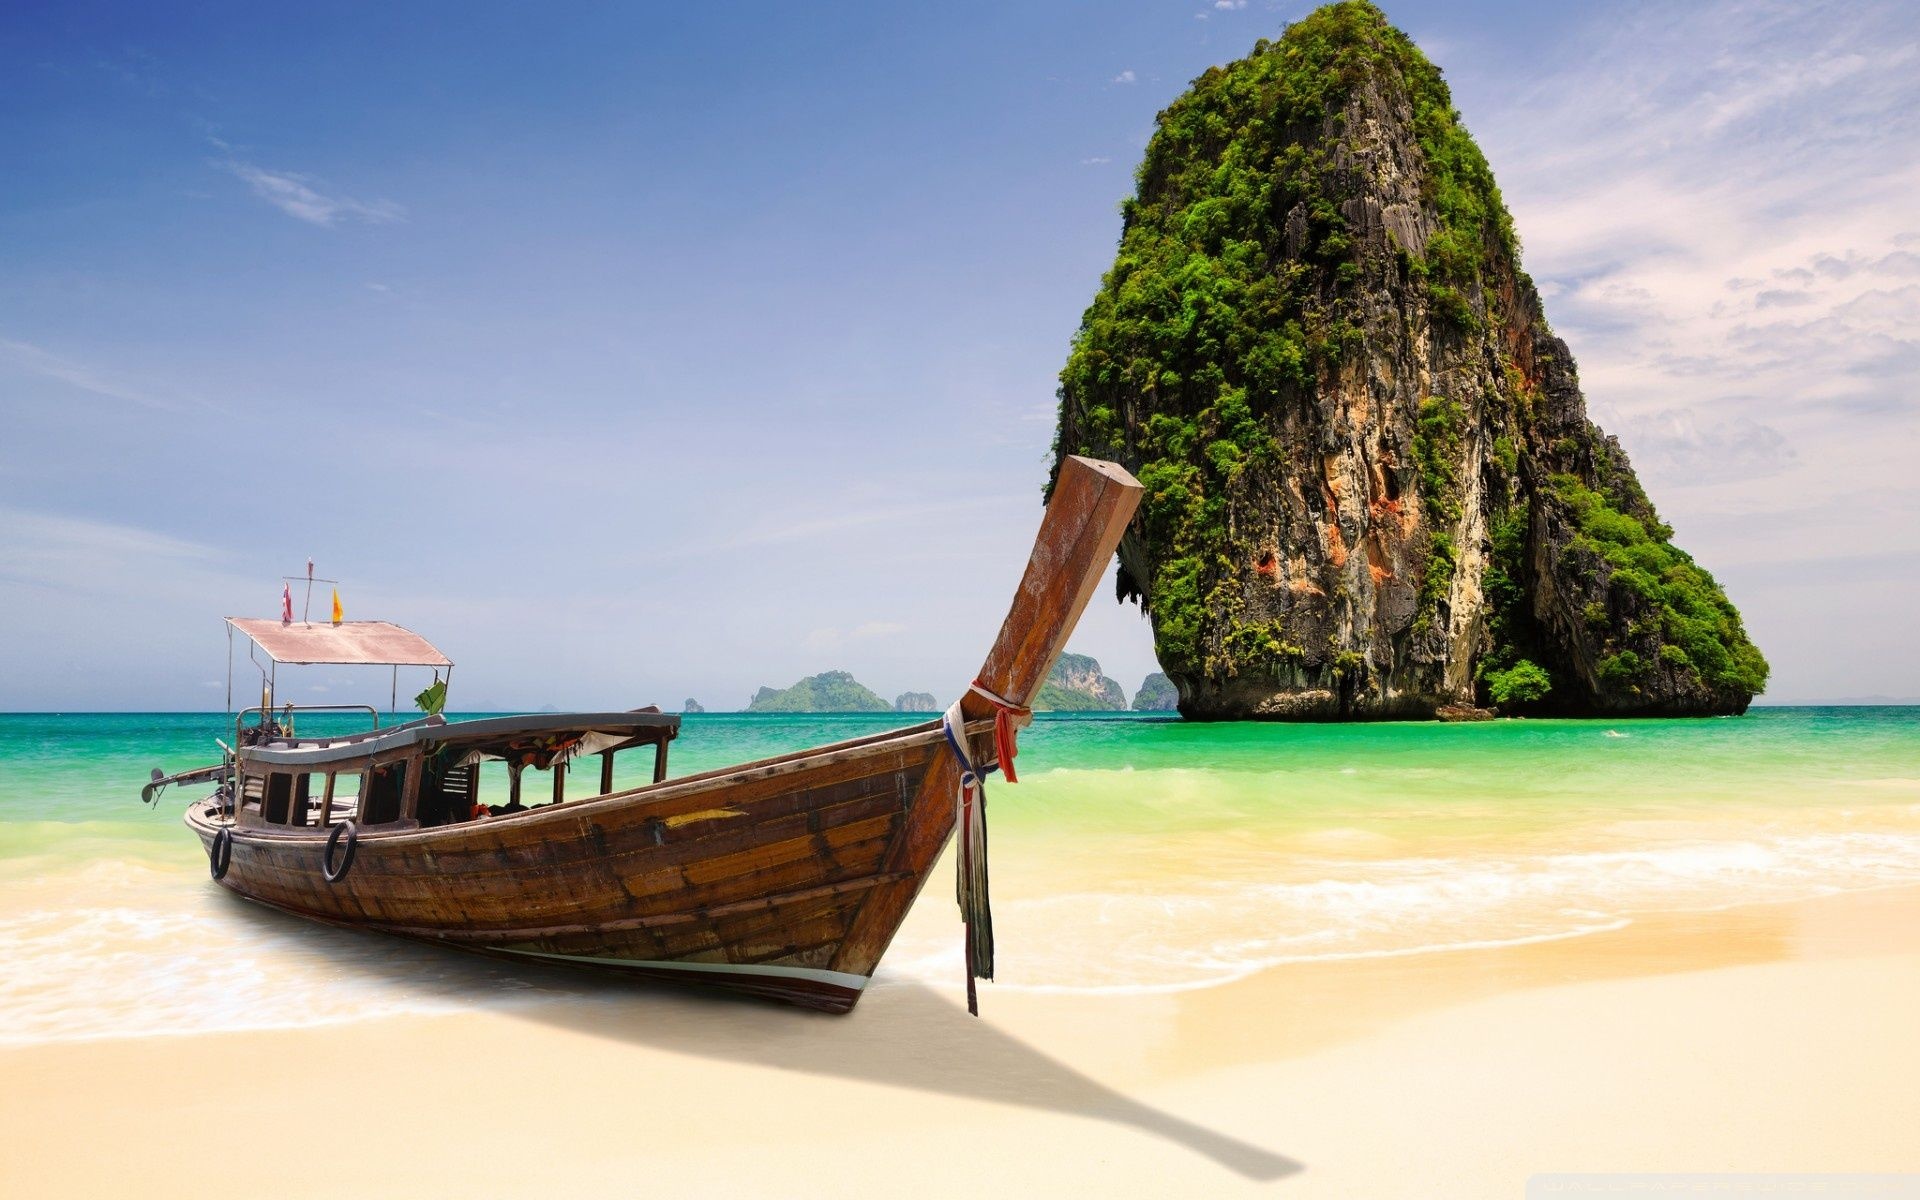 Thailand iPhone wallpapers, Exquisite mobile backgrounds, Tropical paradise, Scenic beauty, 1920x1200 HD Desktop